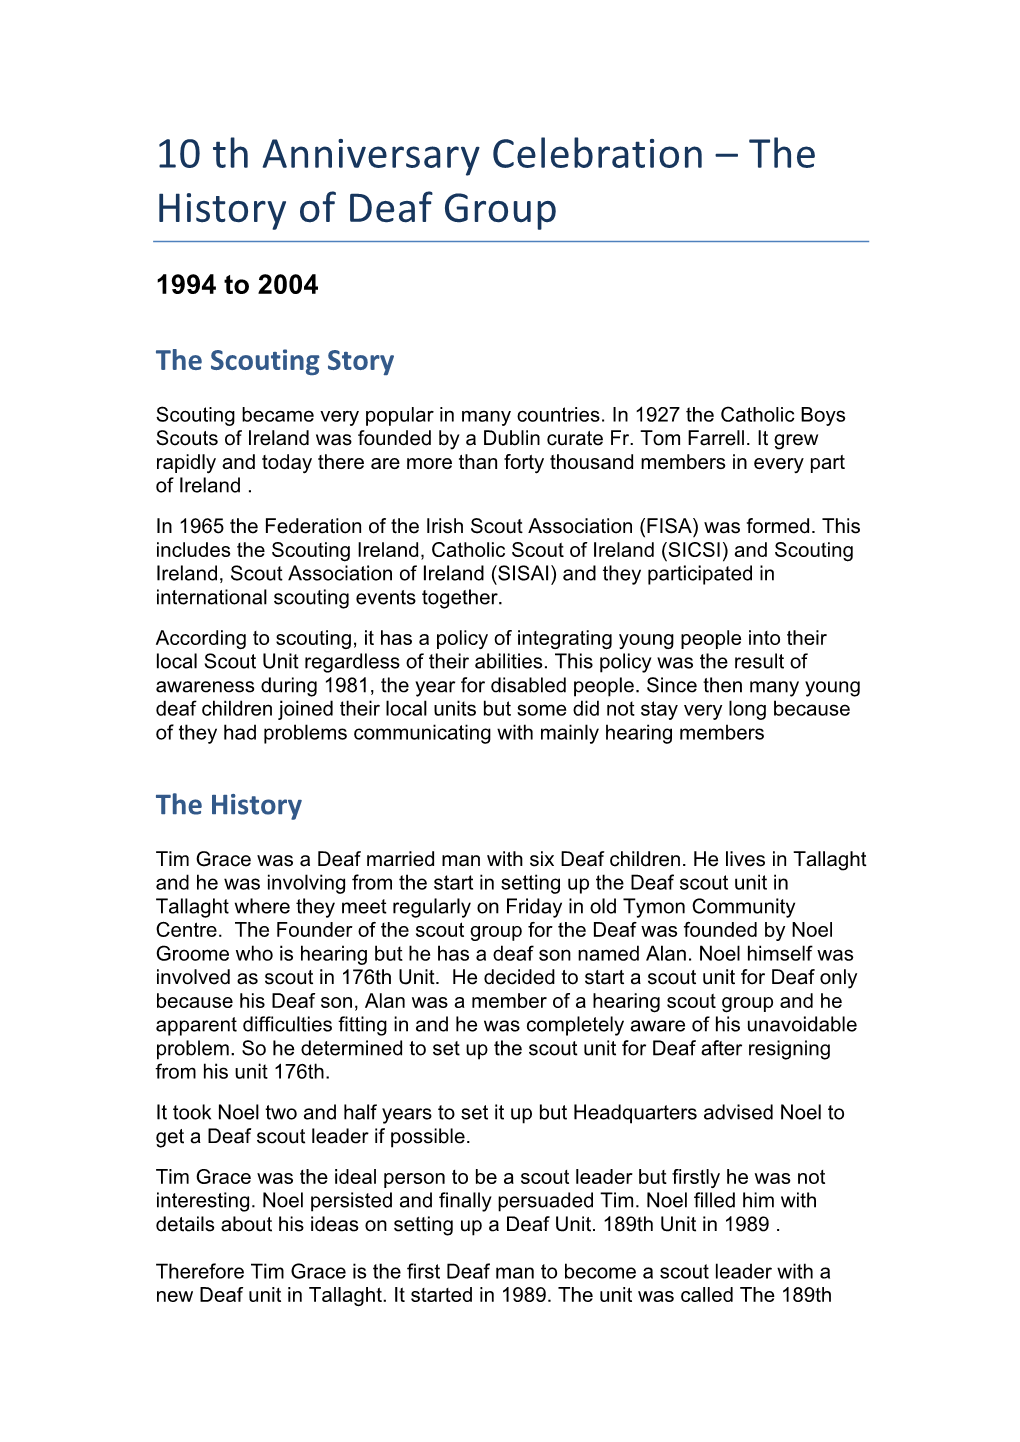 The History of Deaf Group